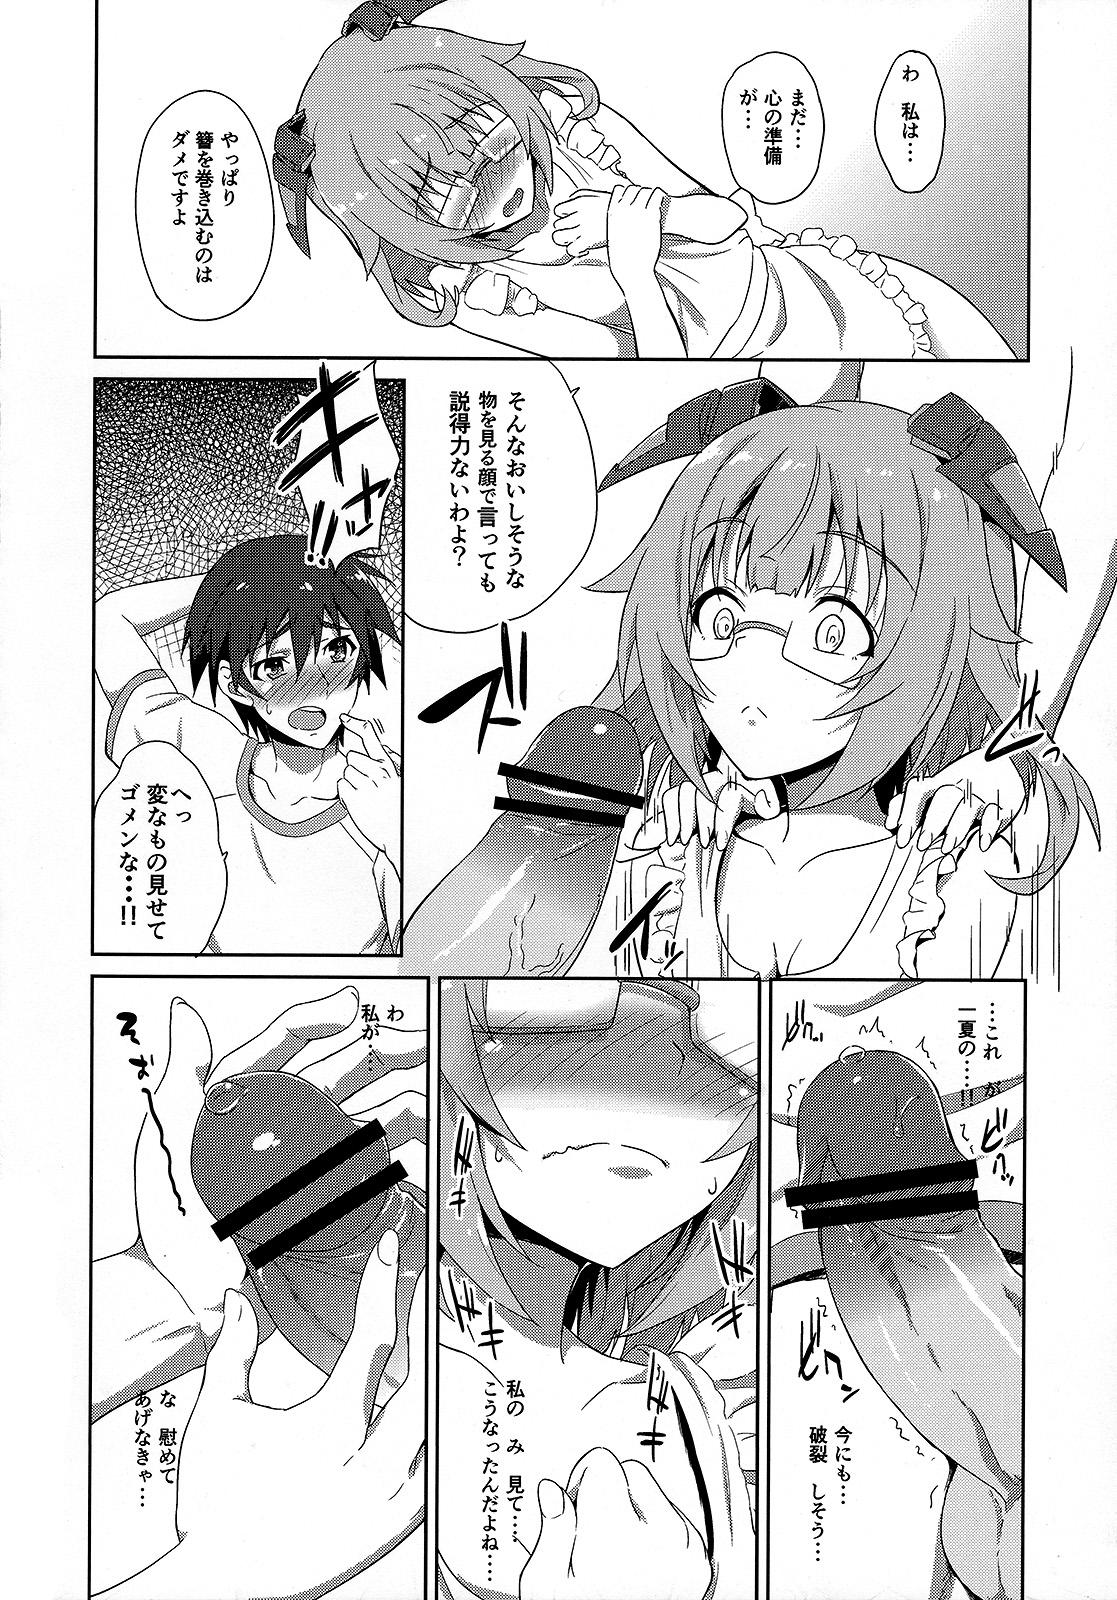 Boquete IS ICHIKA LOVE SISTERS!! - Infinite stratos Tight Pussy Fucked - Page 7